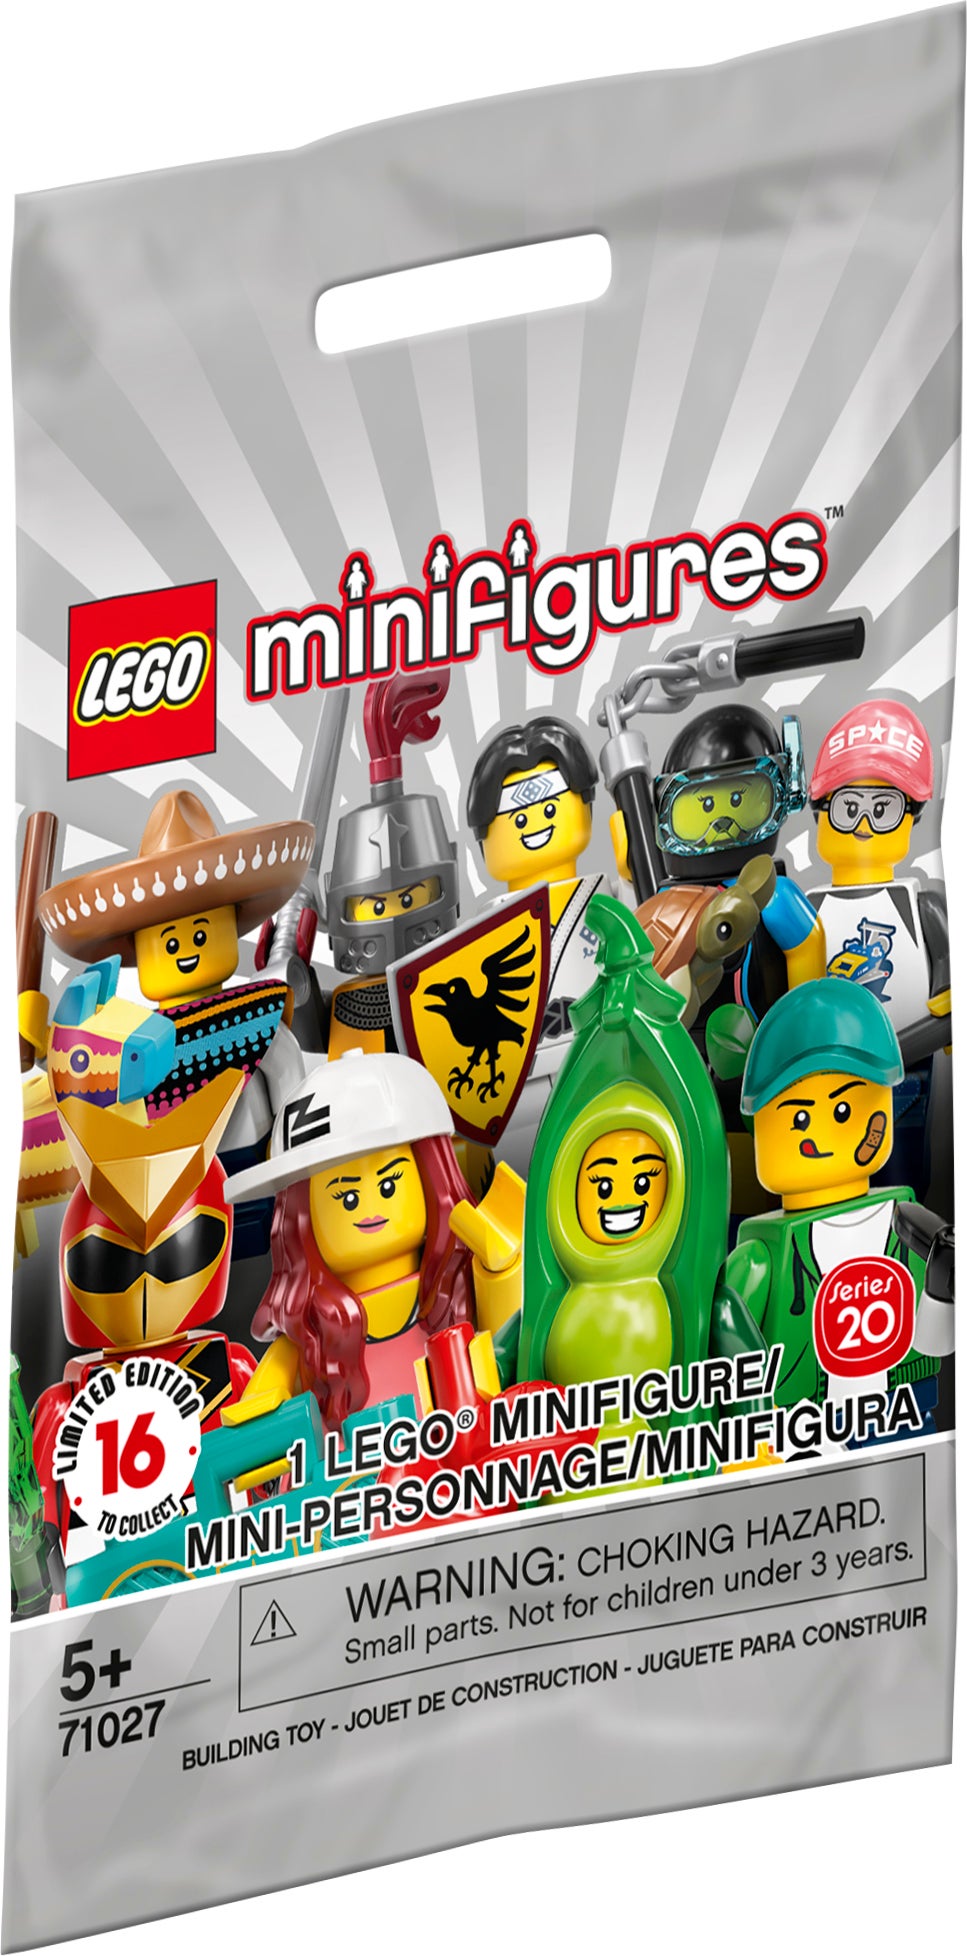 for sale online LEGO Series 20 LEGO Minifigures 71027 